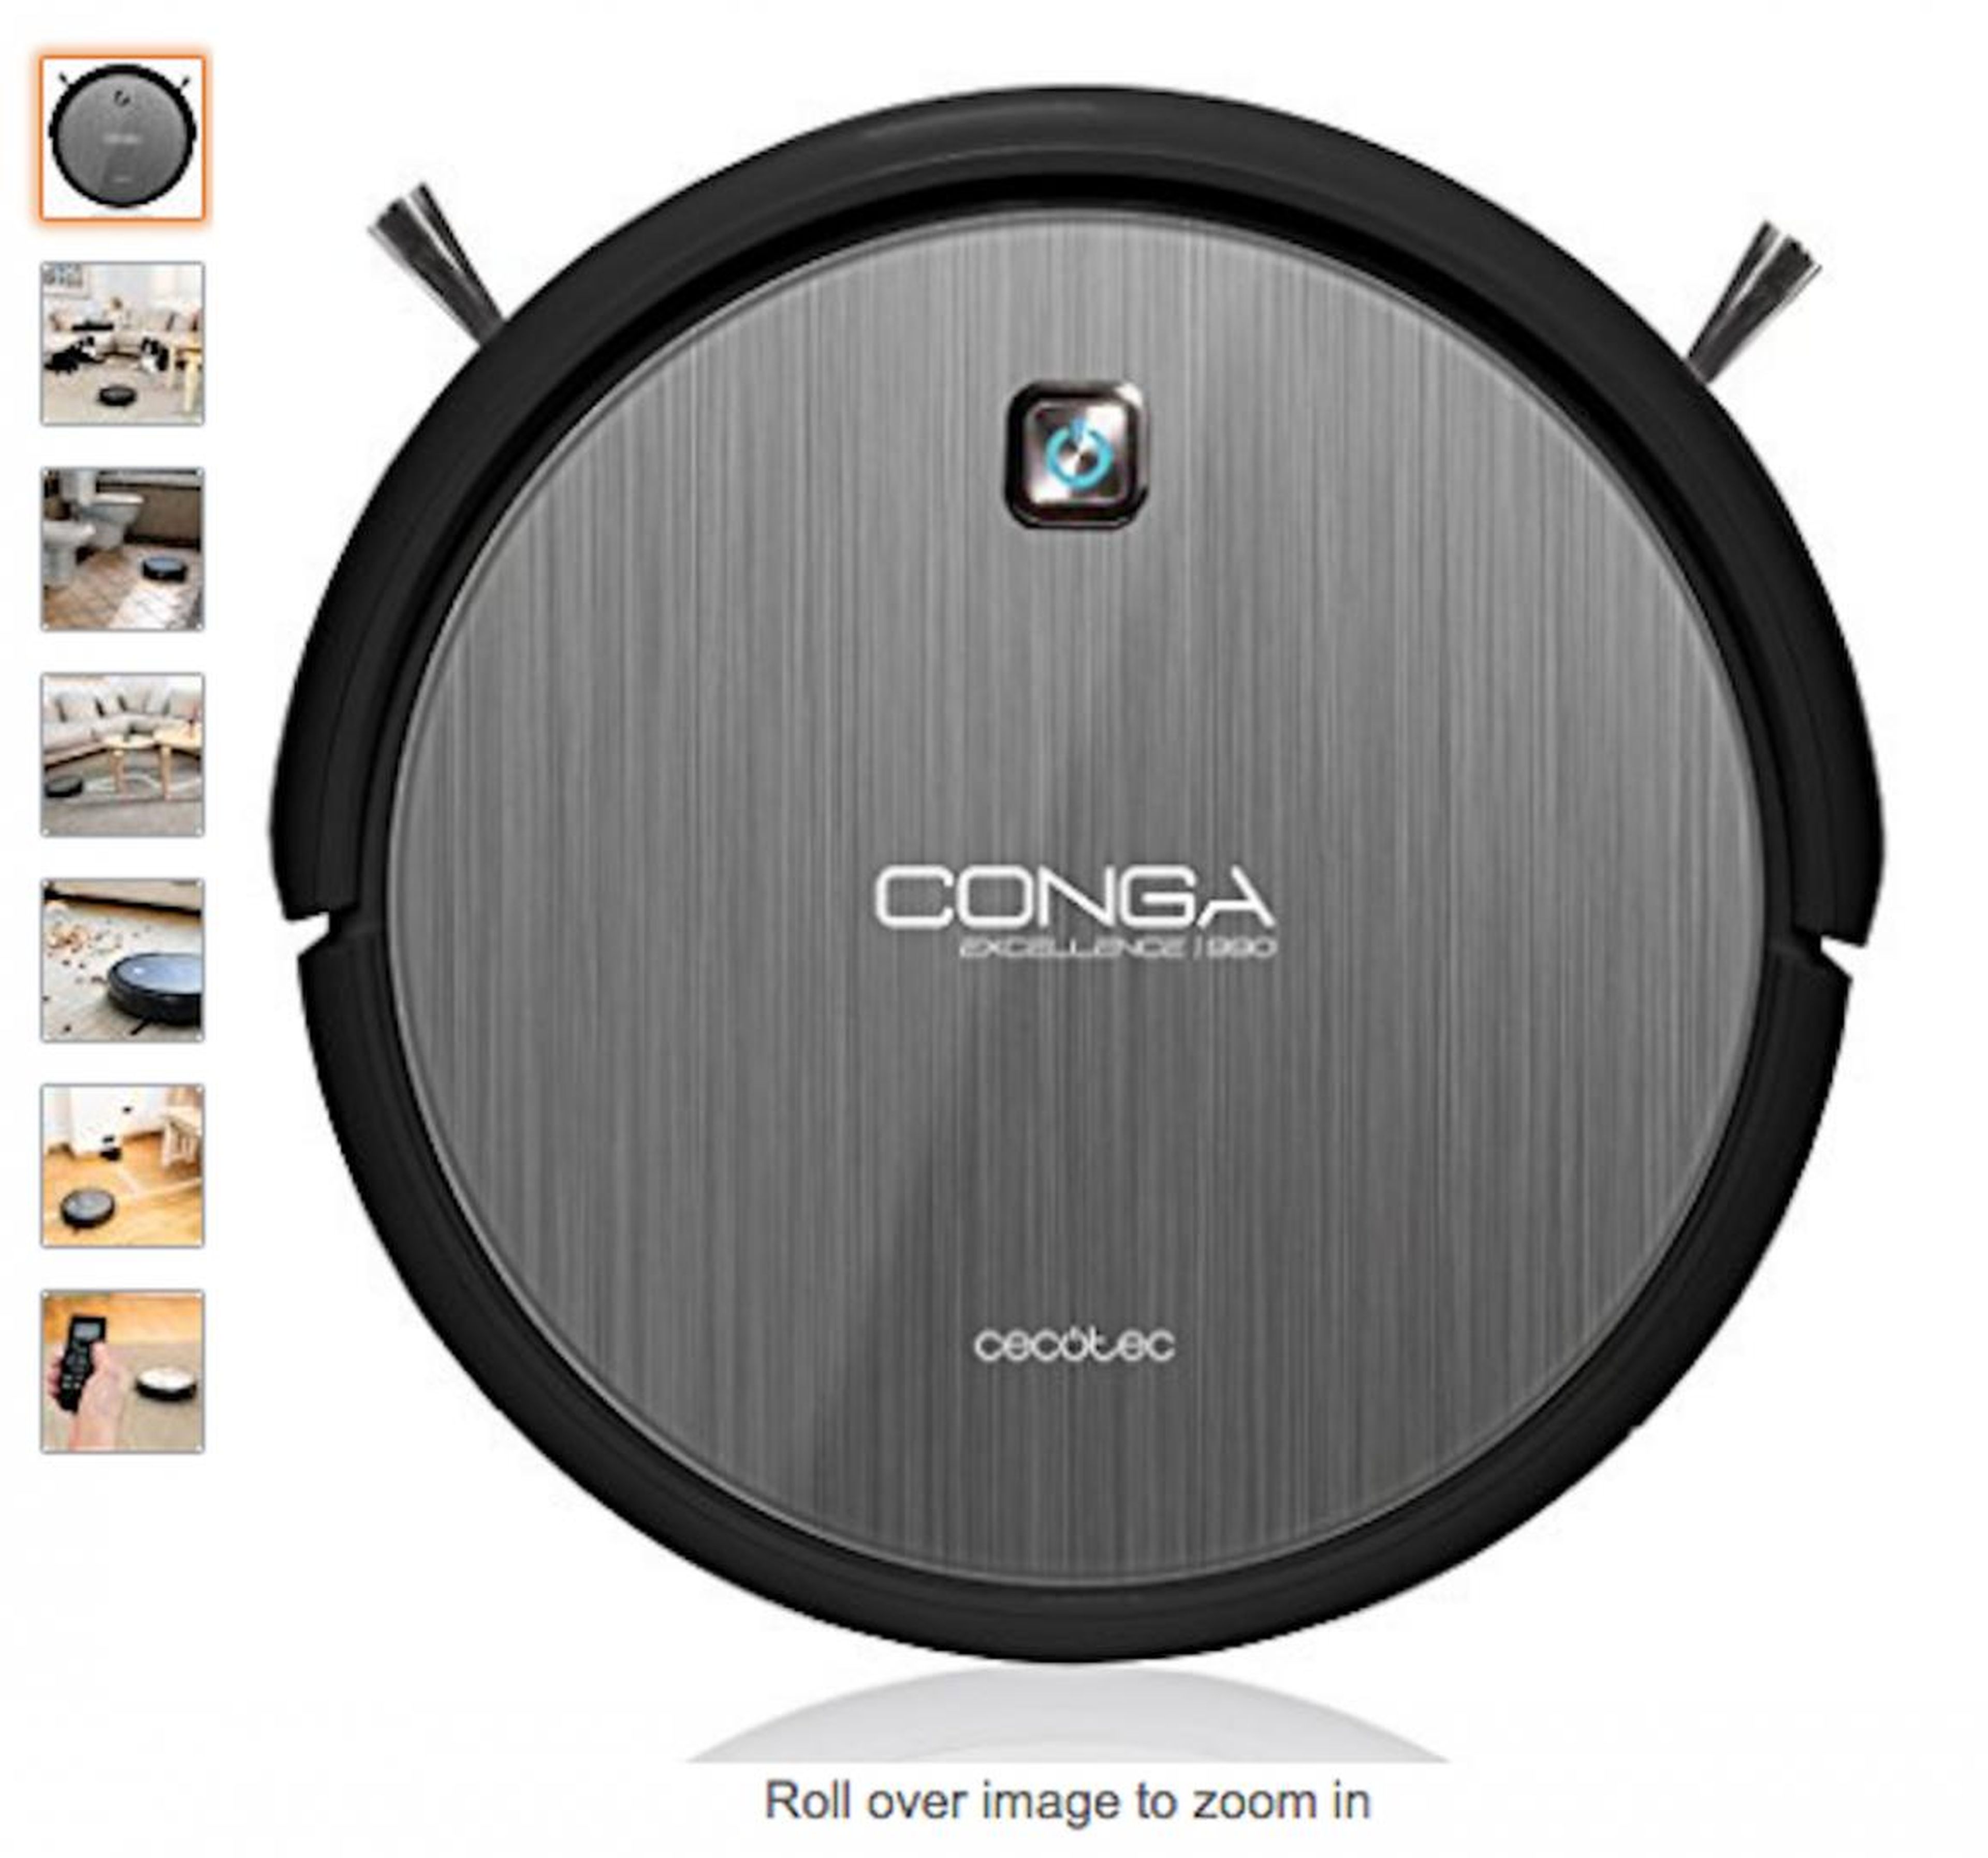 Spanish shoppers also bought the Cecotec Conga Excellence 990 4 in 1 iTech 3.0 robot vacuum cleaner.